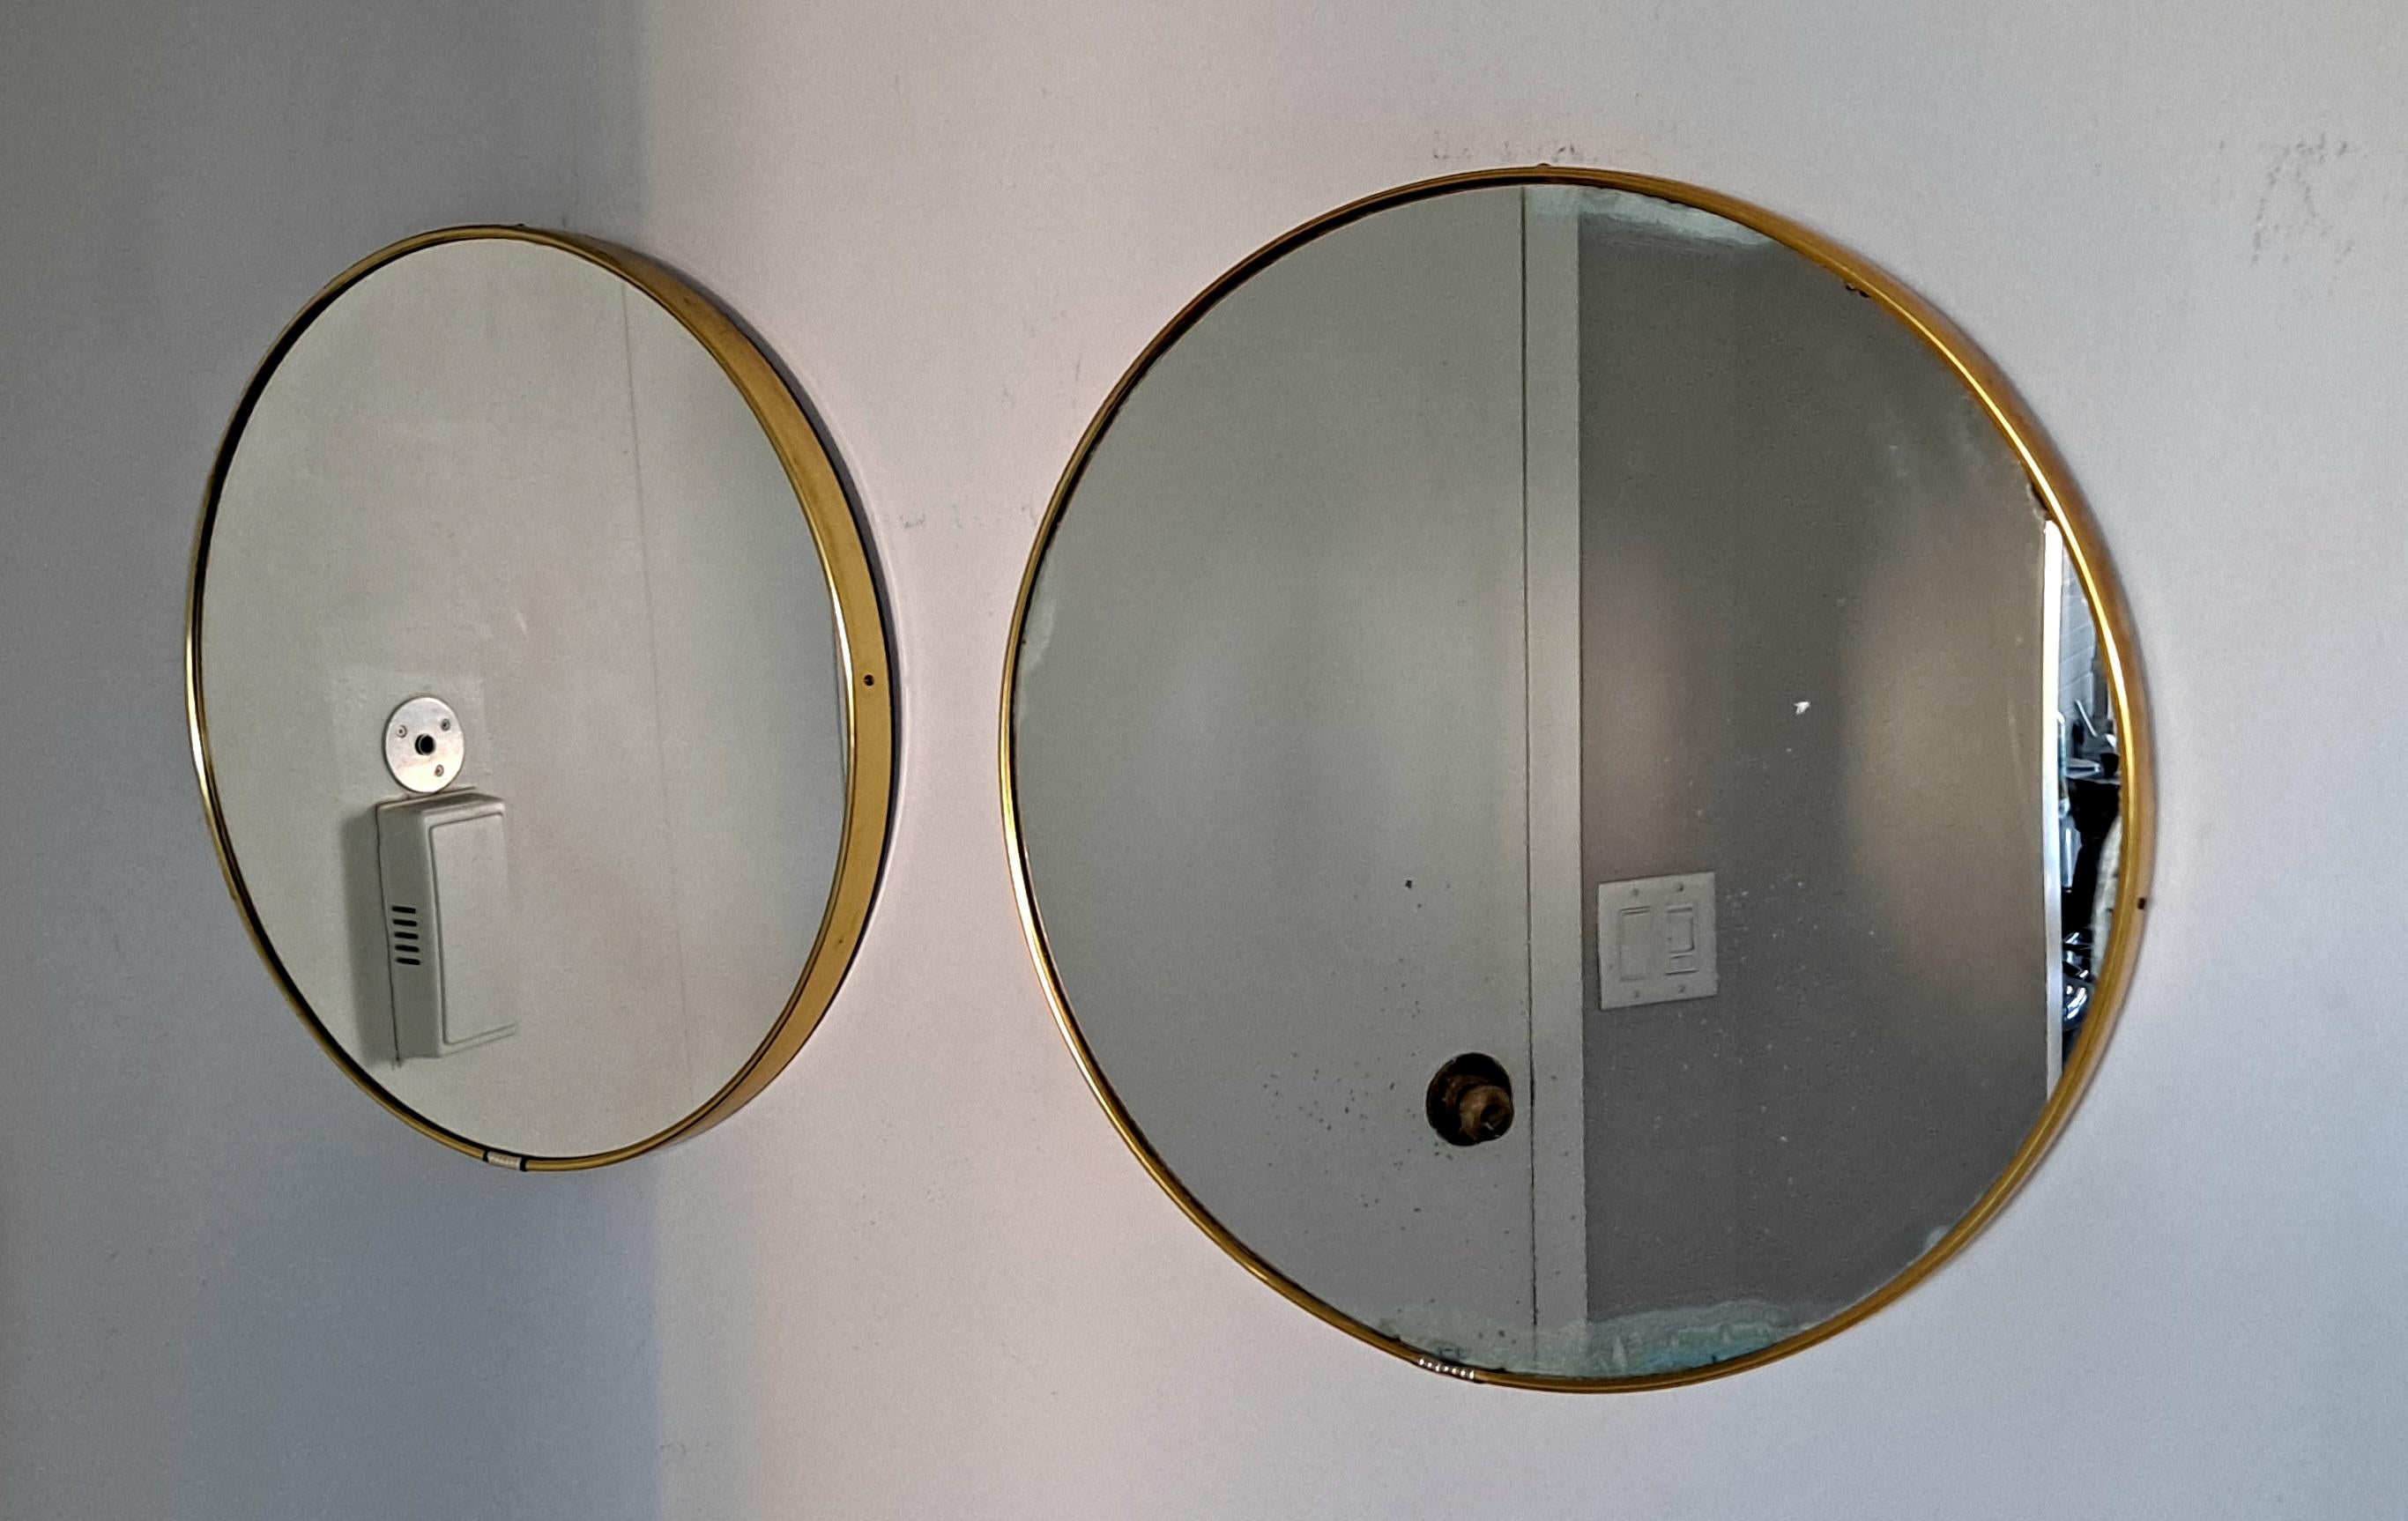 Pair of brass Italian round wall mirrors original condition from the period one of the mirror have a patina as shown on the photos.
We can change the mirror.